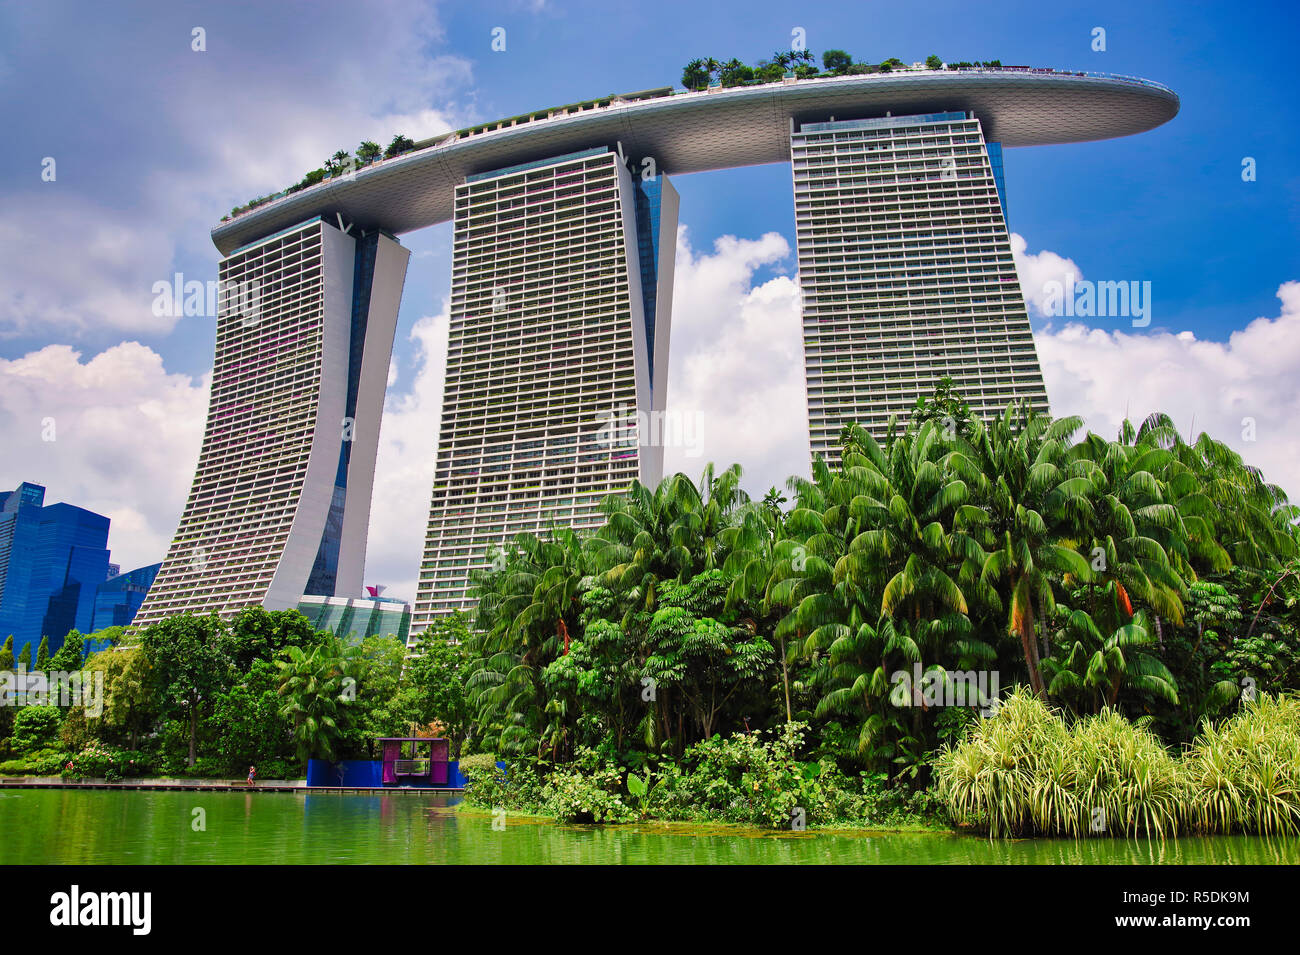 The Marina Bay Sands Building in Singapore against a blue sky